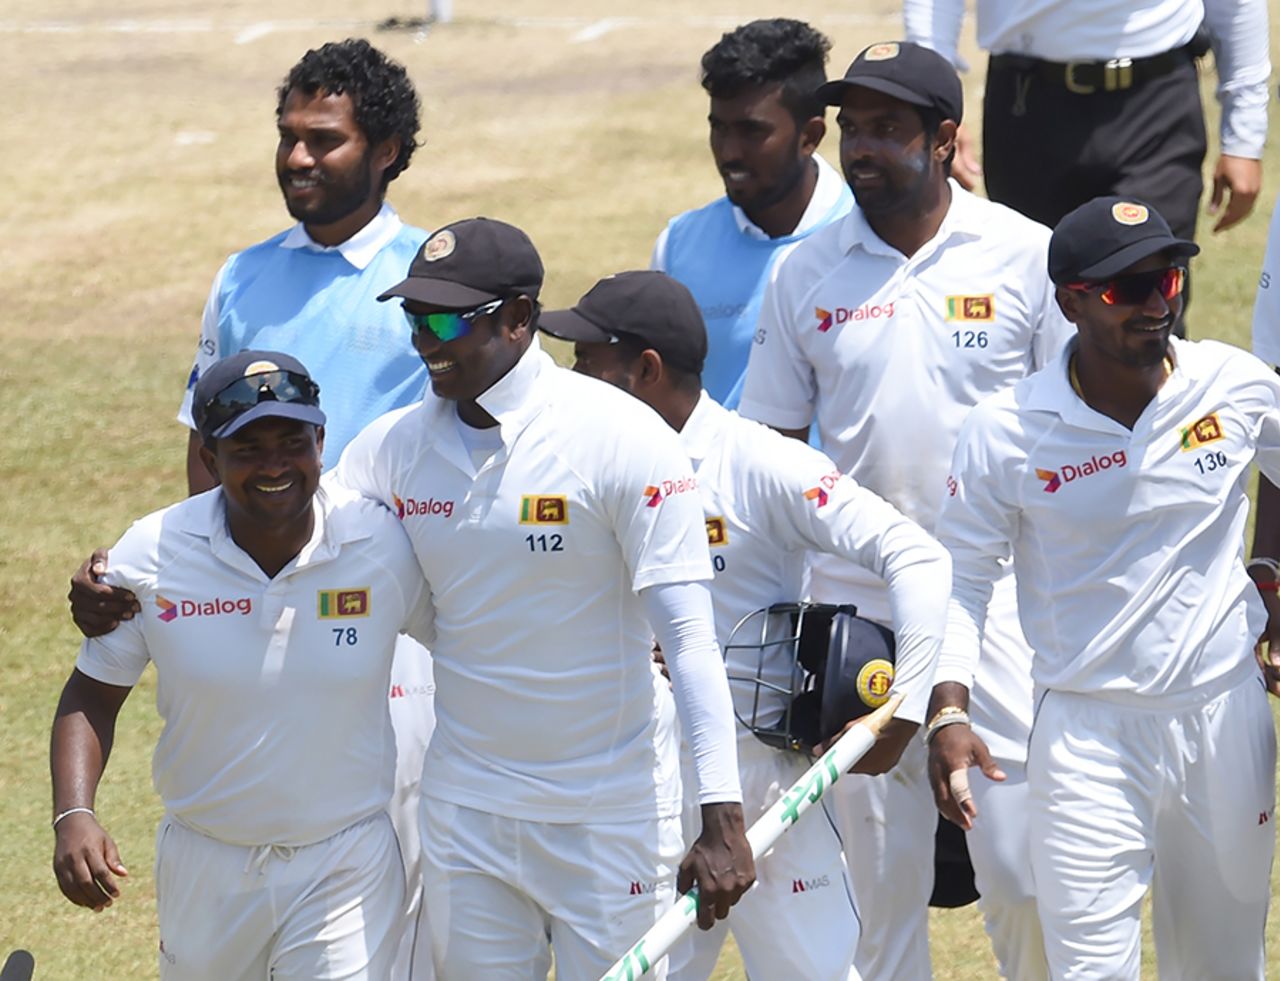 Rangana Herath and Angelo Mathews are all smiles as they walk off the field, Sri Lanka v Australia, 2nd Test, Galle, 3rd day, August 6, 2016